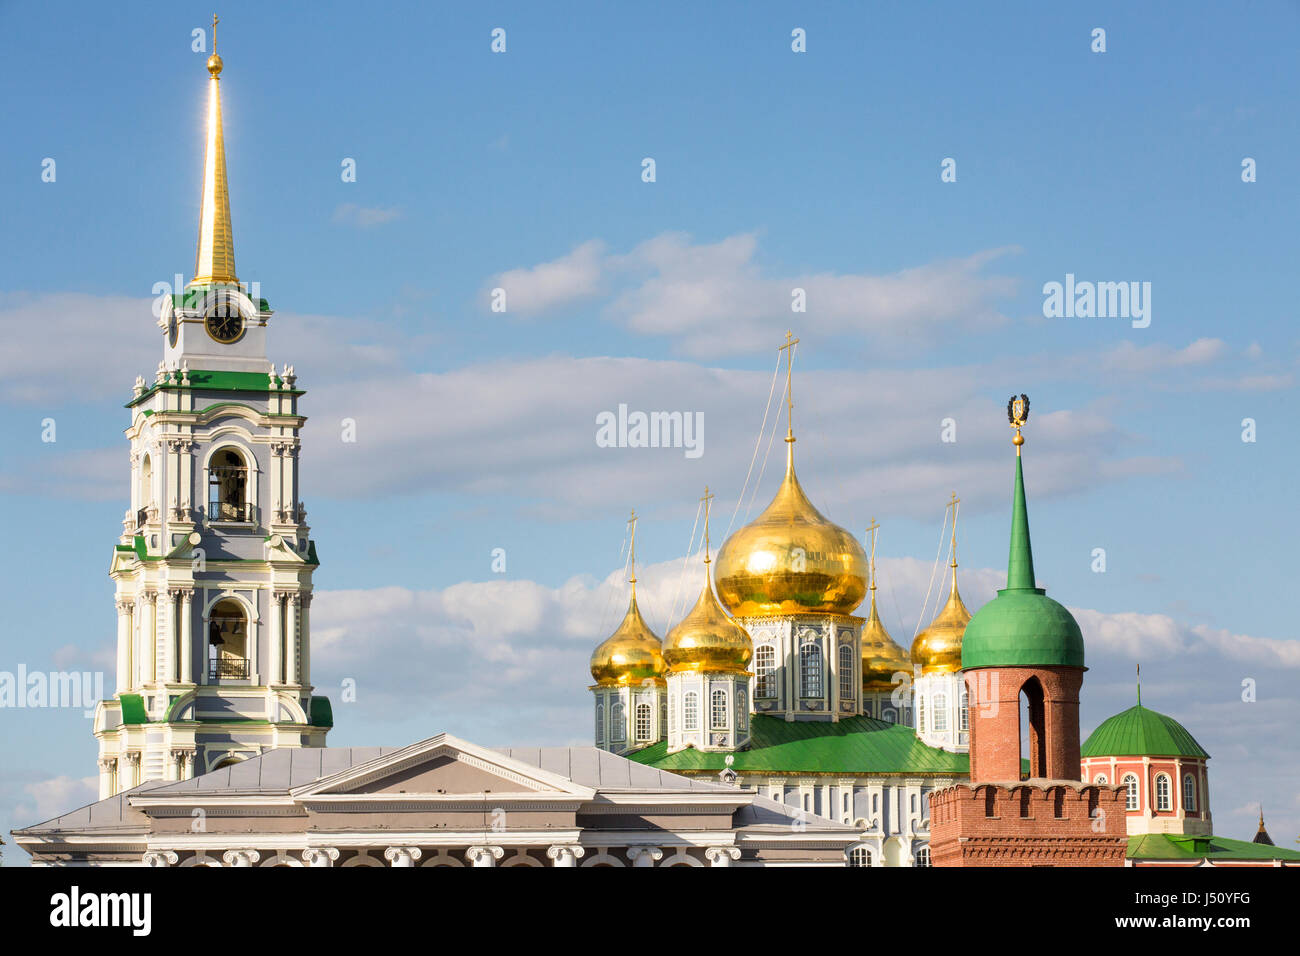 View of Odoevskaya tower of the Tula Kremlin, Assumption (Uspensky) Cathedral and Museum of Tula samovar at downtown of Tula, Russia Stock Photo